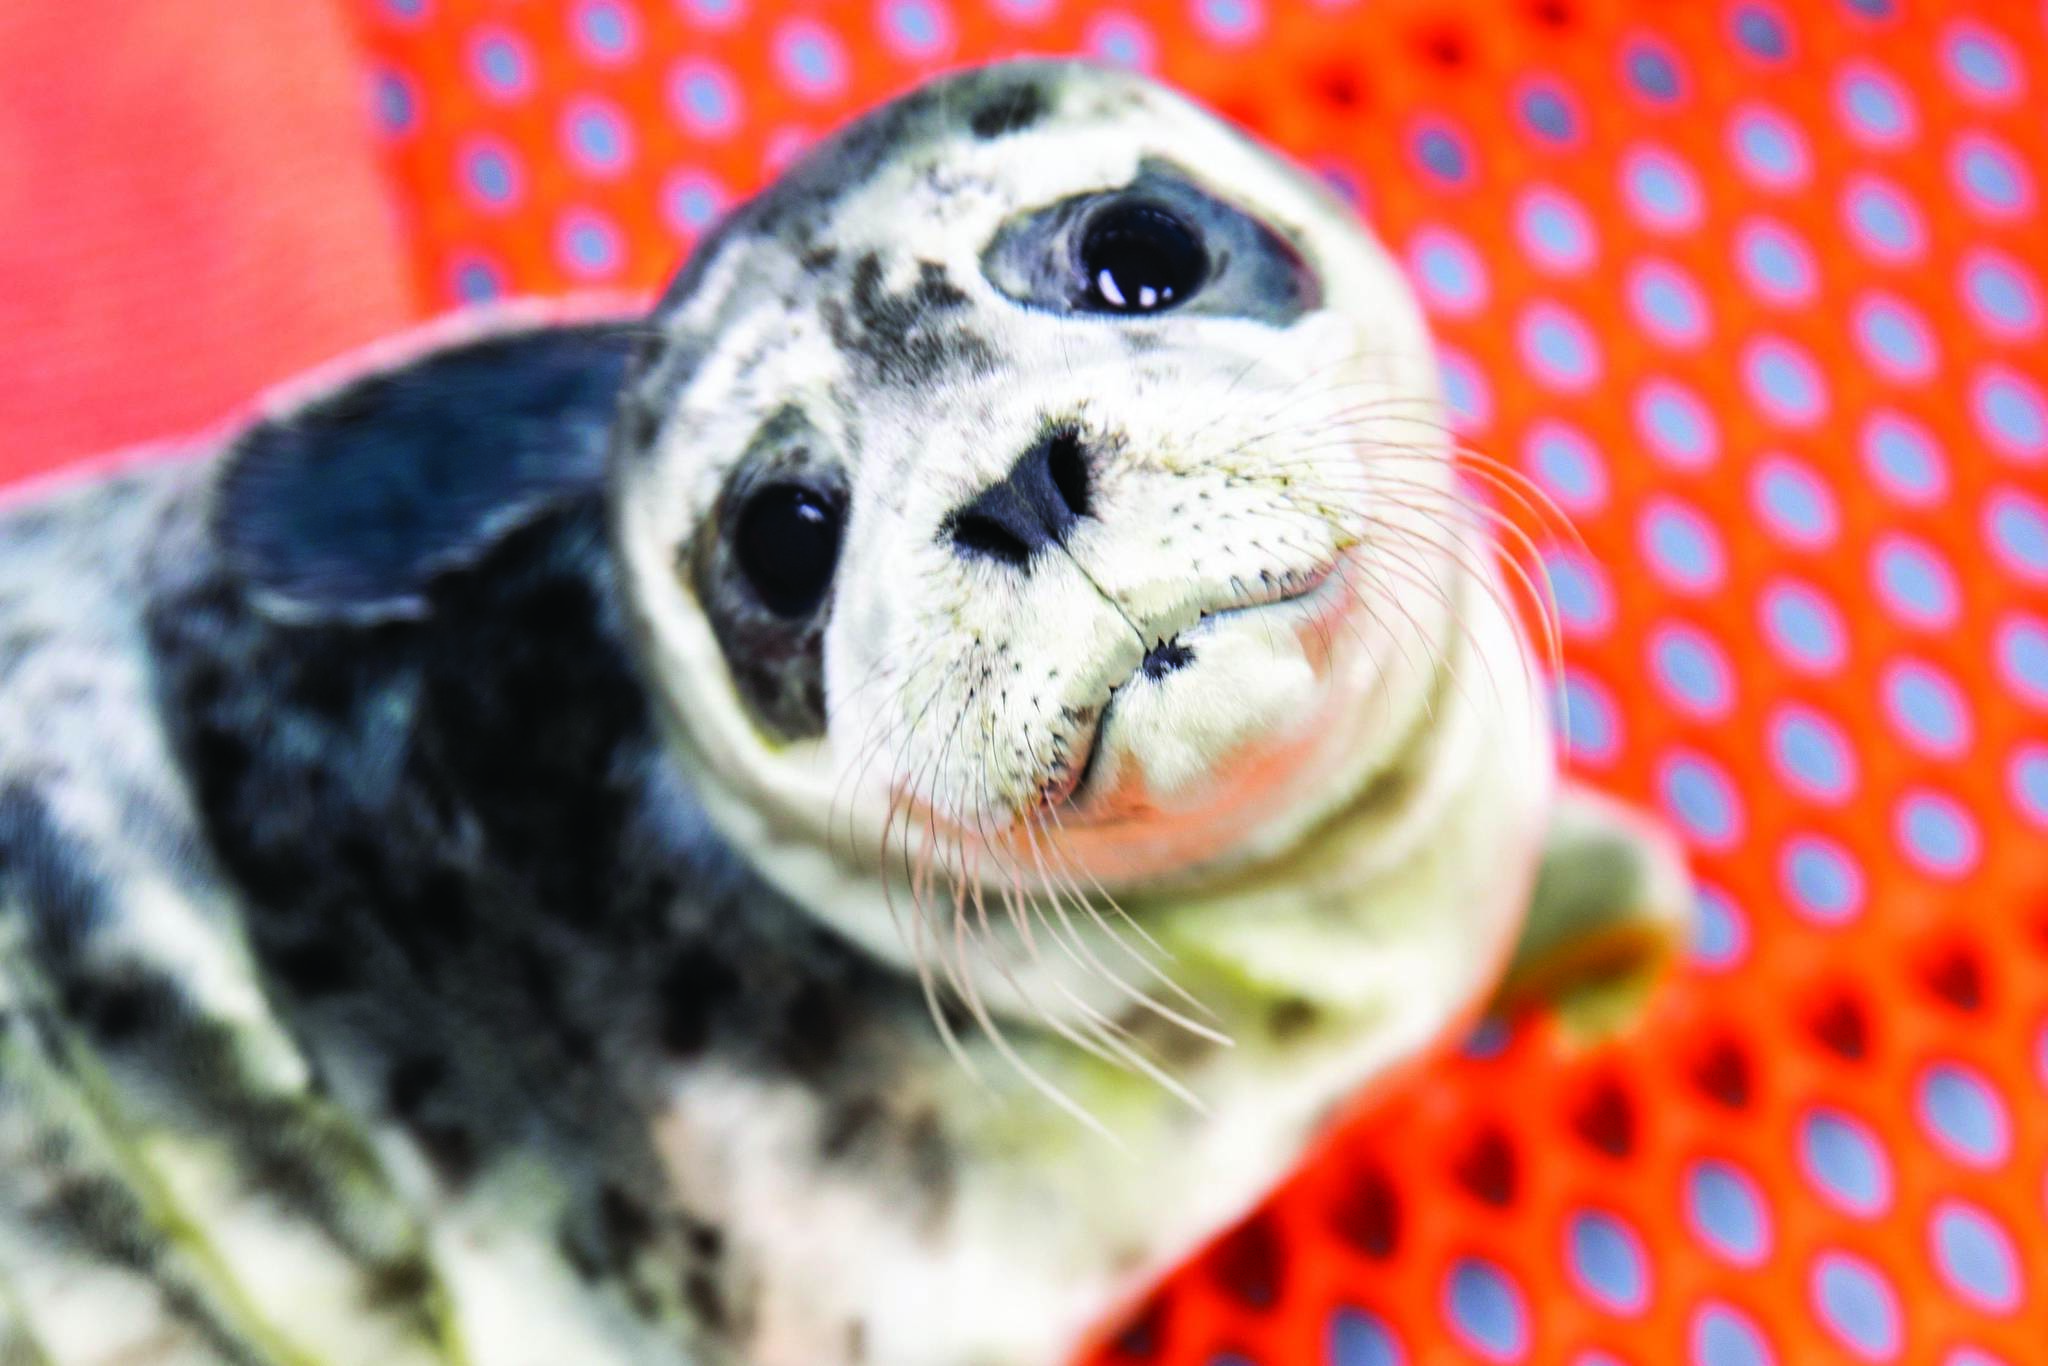 One of the recently rescued harbor seal pups is seen here at the Alaska SeaLife Center in Seward, Alaska in this undated photo. (Courtesy Chloe Rossman/Alaska SeaLife Center)